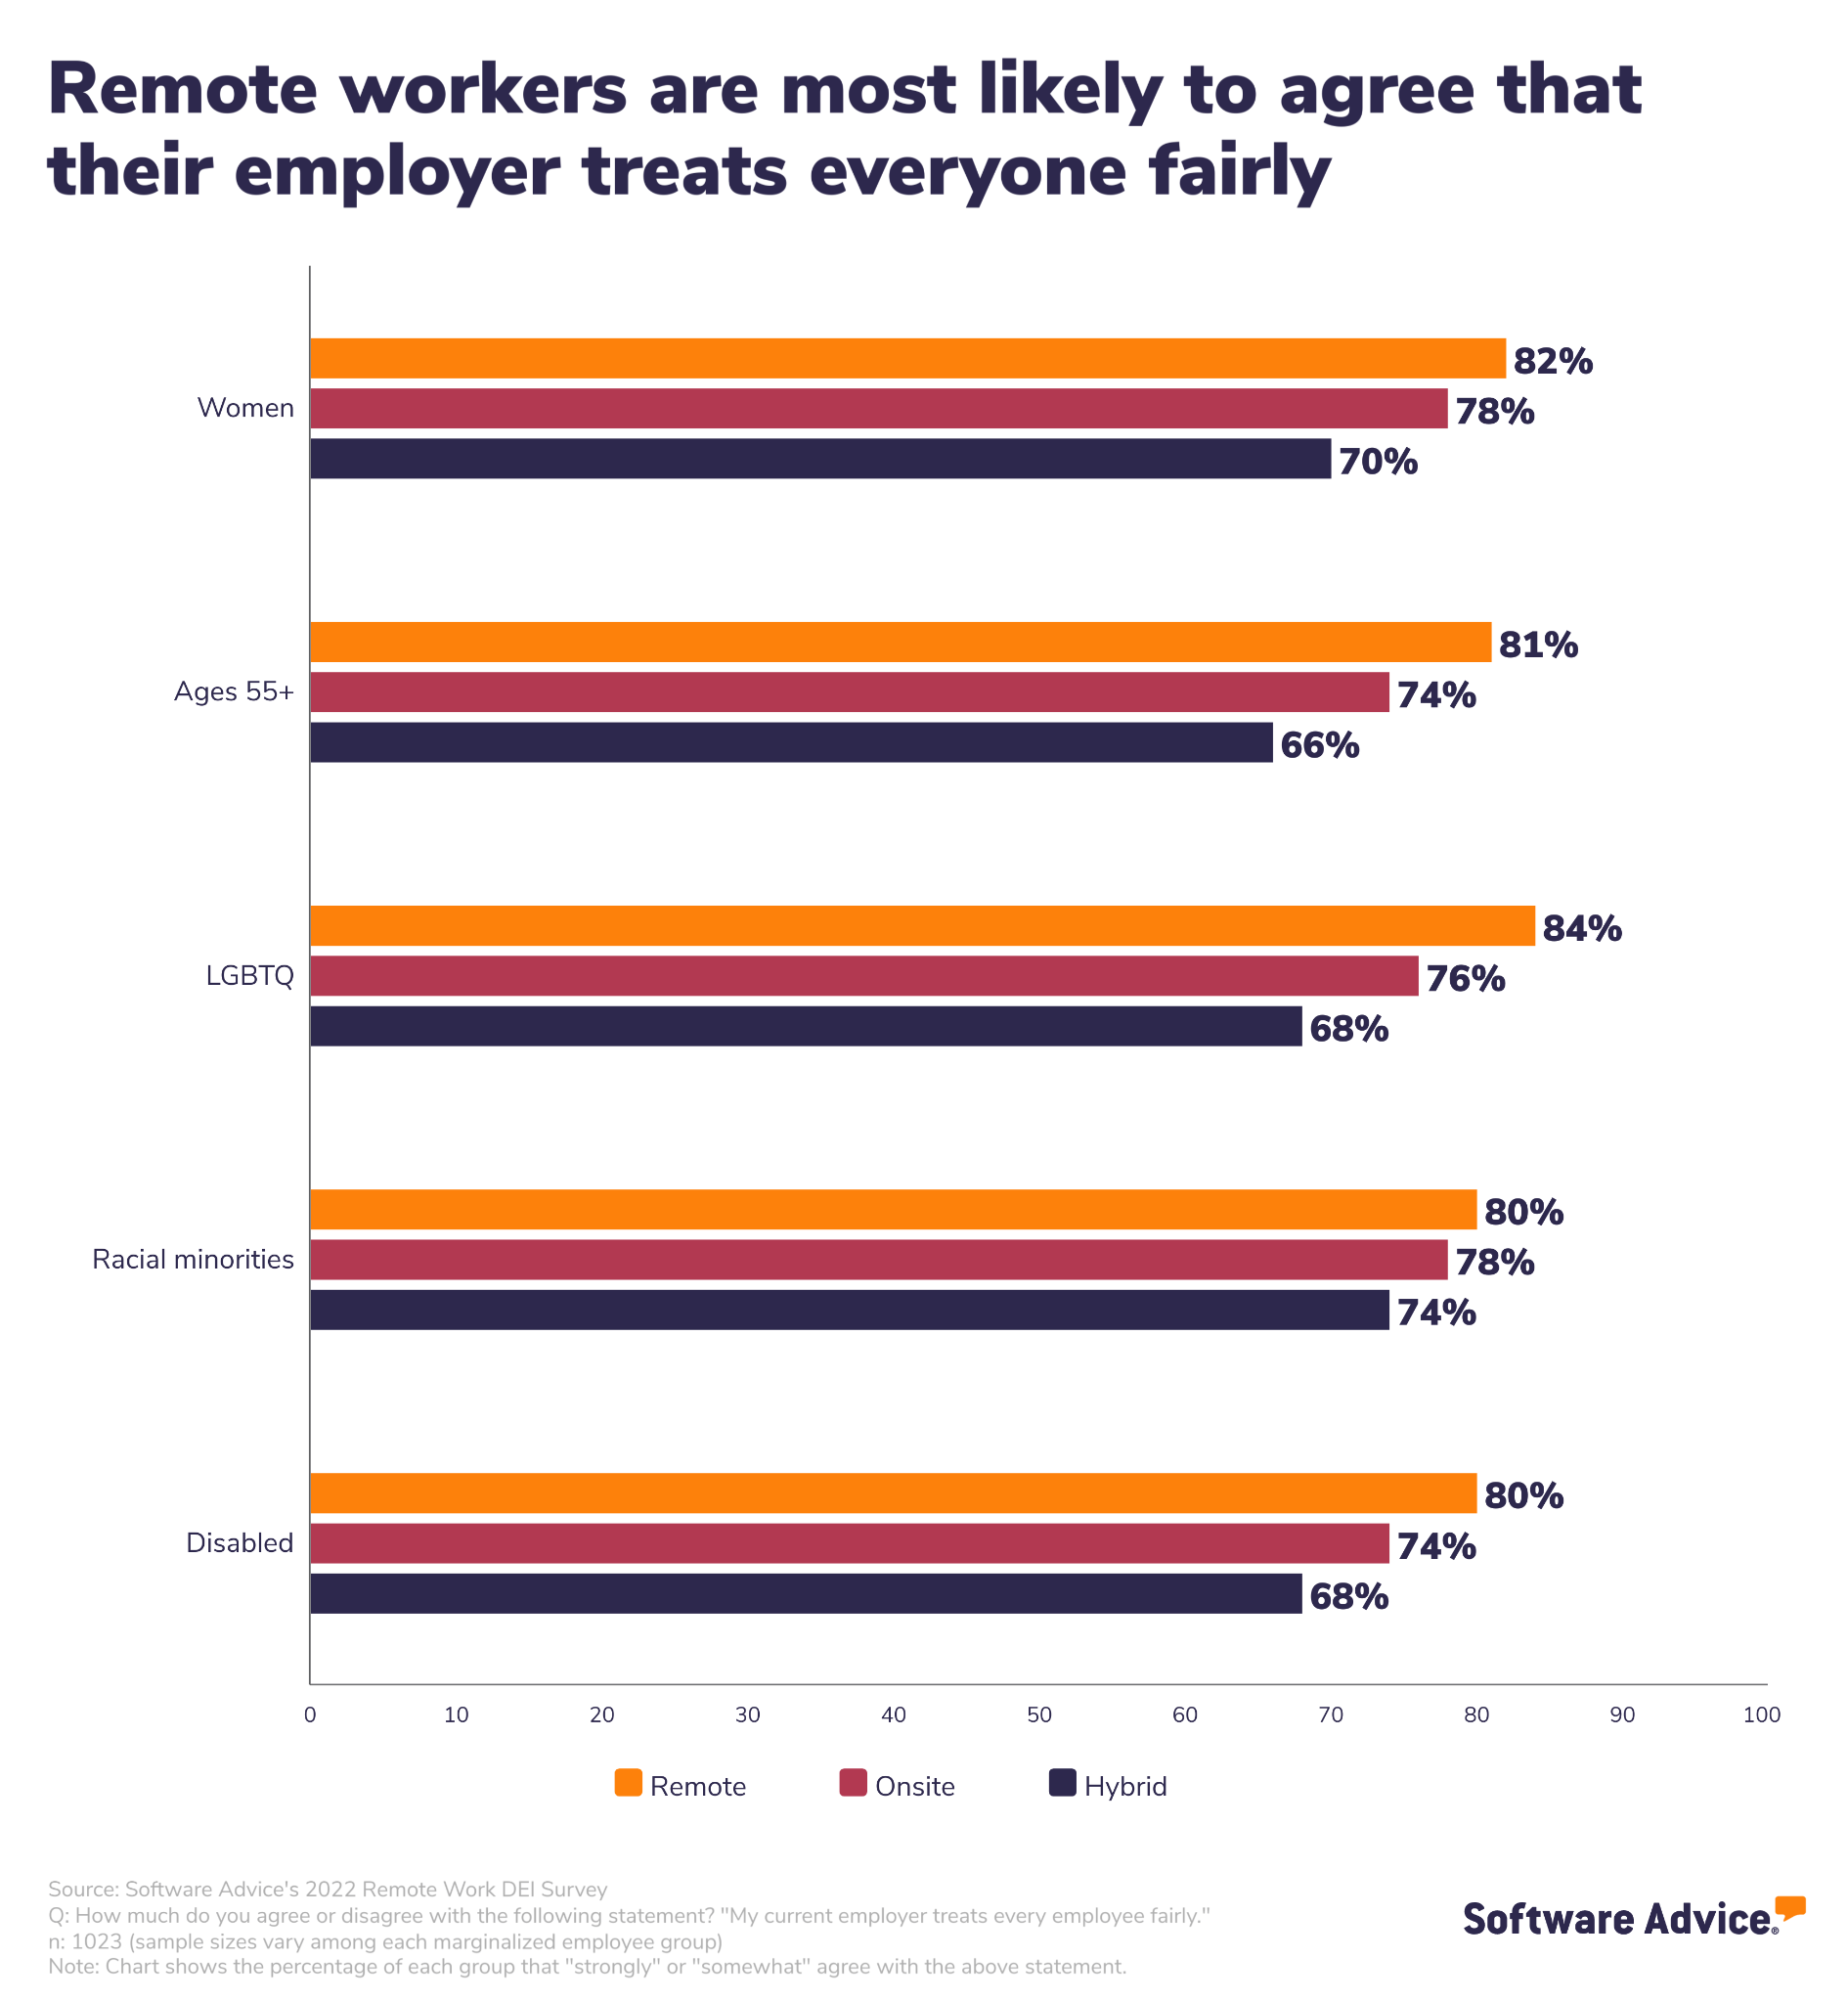 Bar chart showing remote workers are most likely to agree that their employer treats everyone fairly